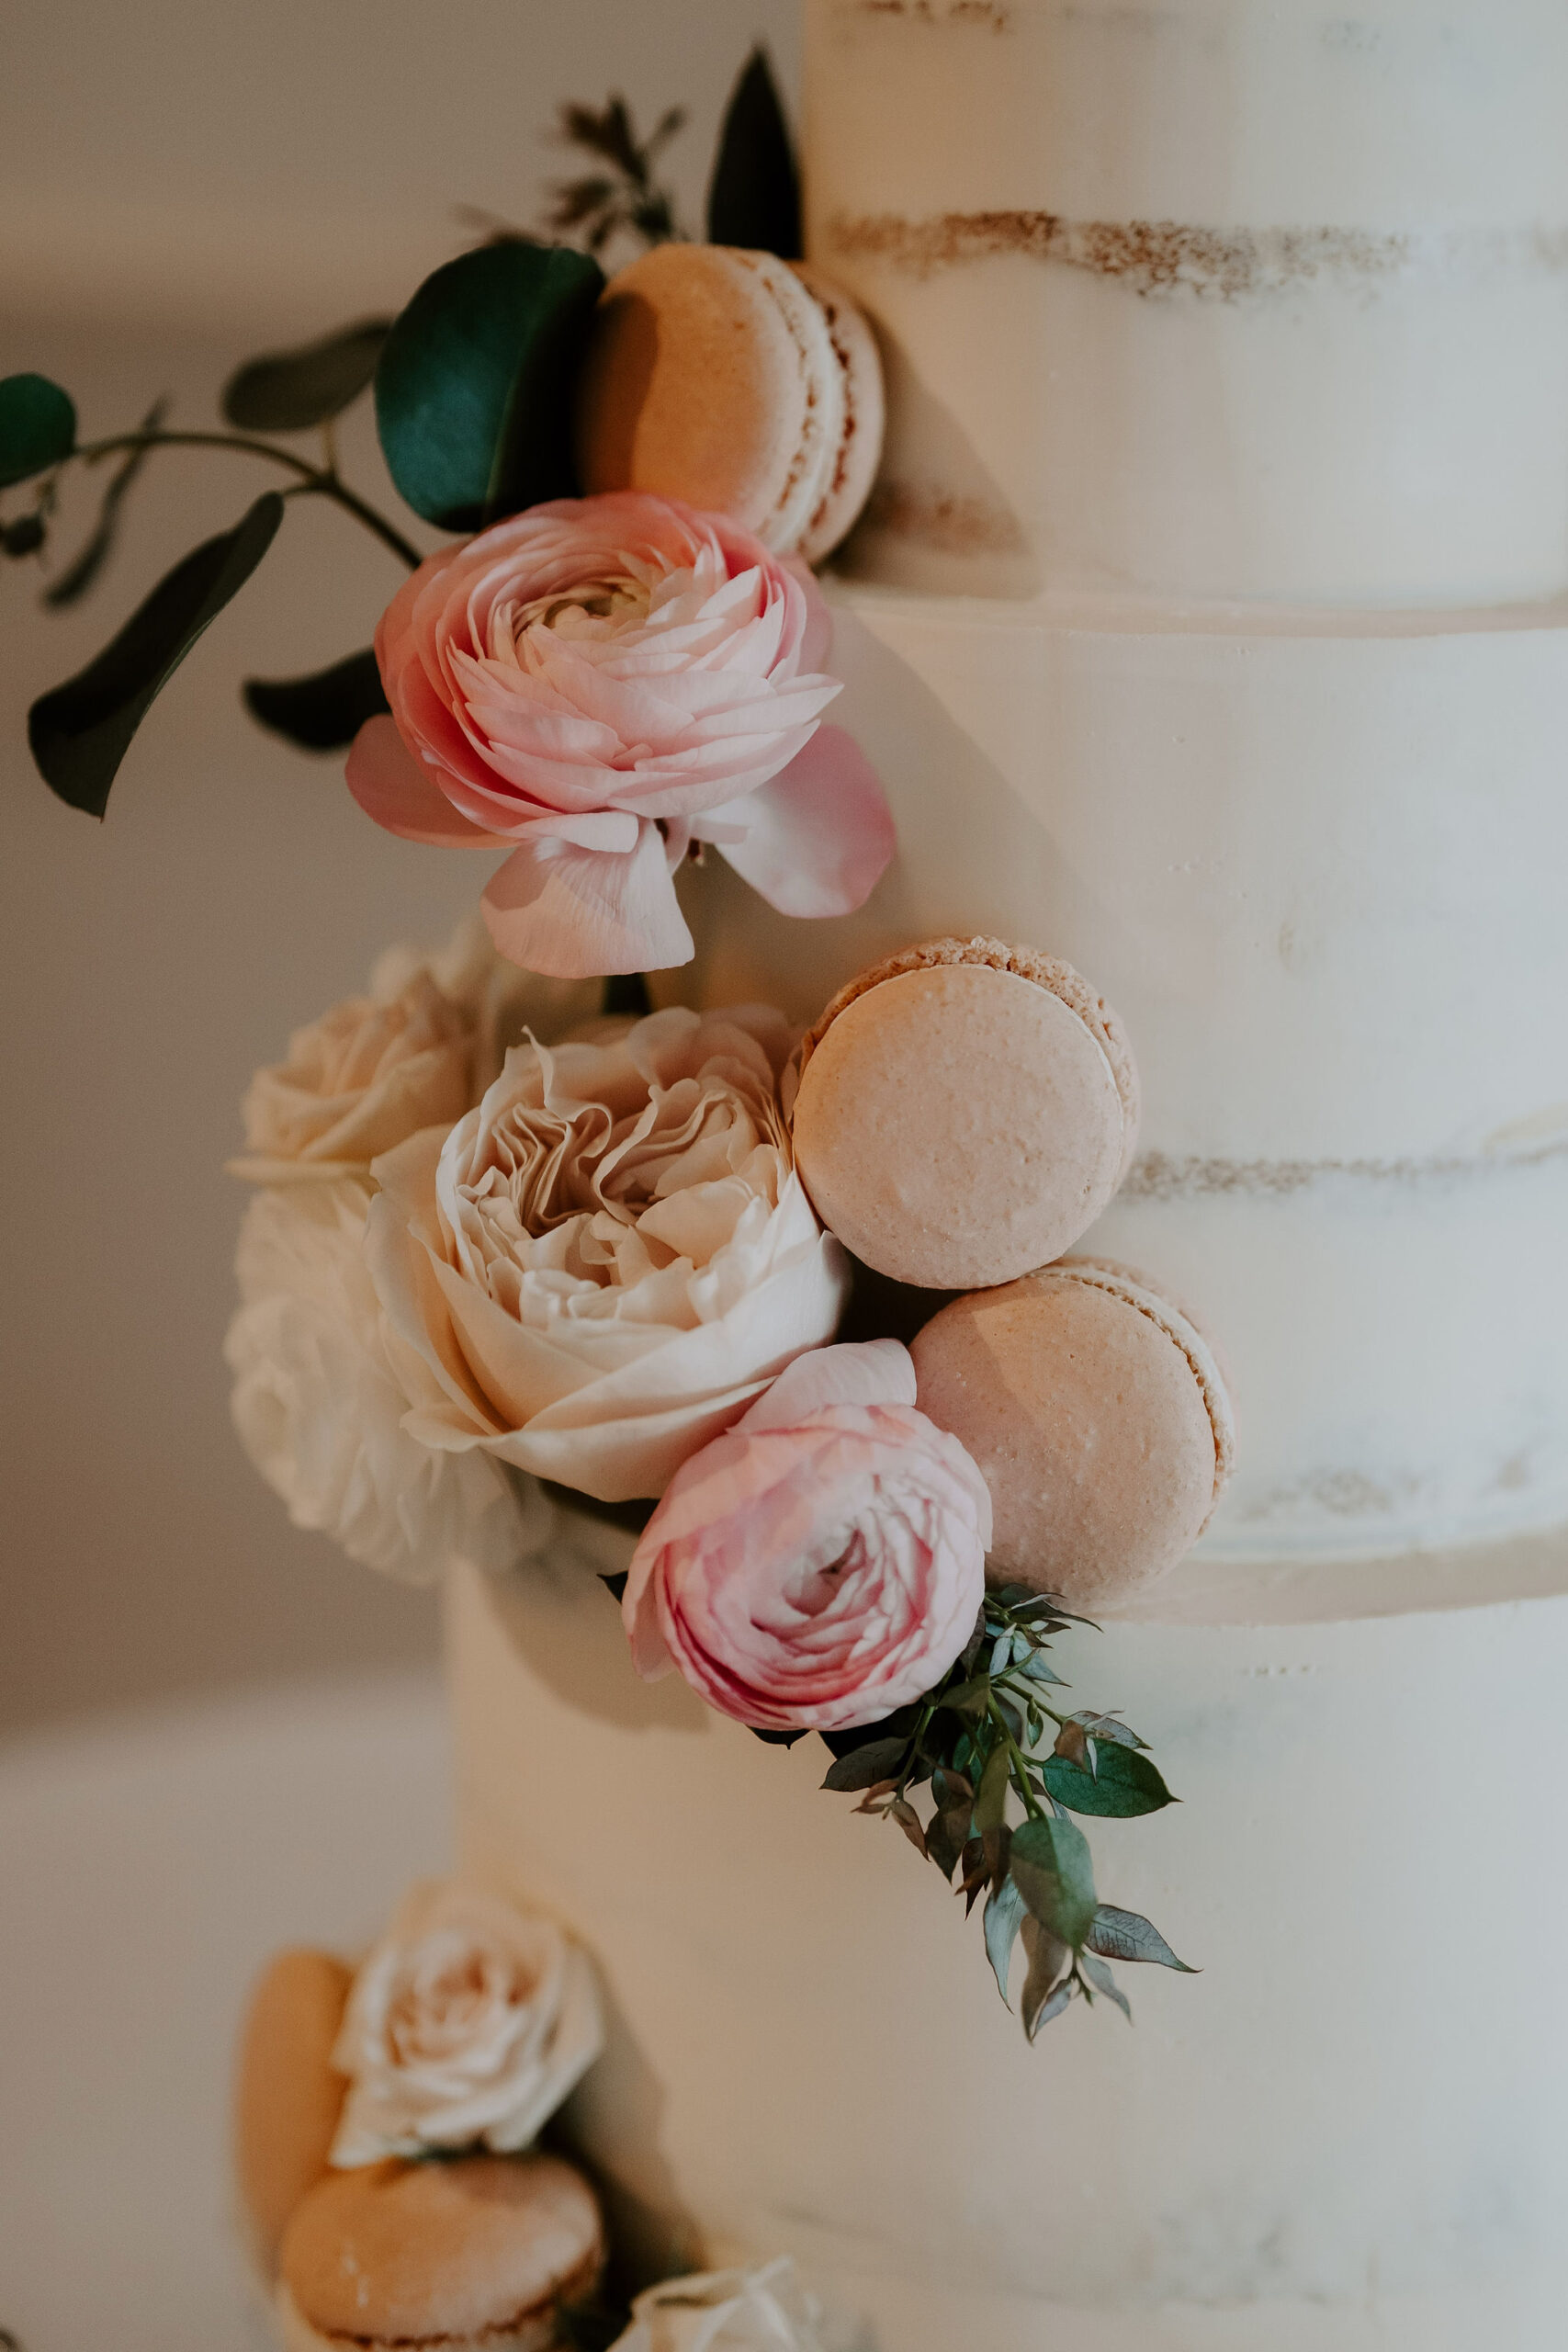 Close up image of a wedding cake with cappuccino and pink toned roses and macarons